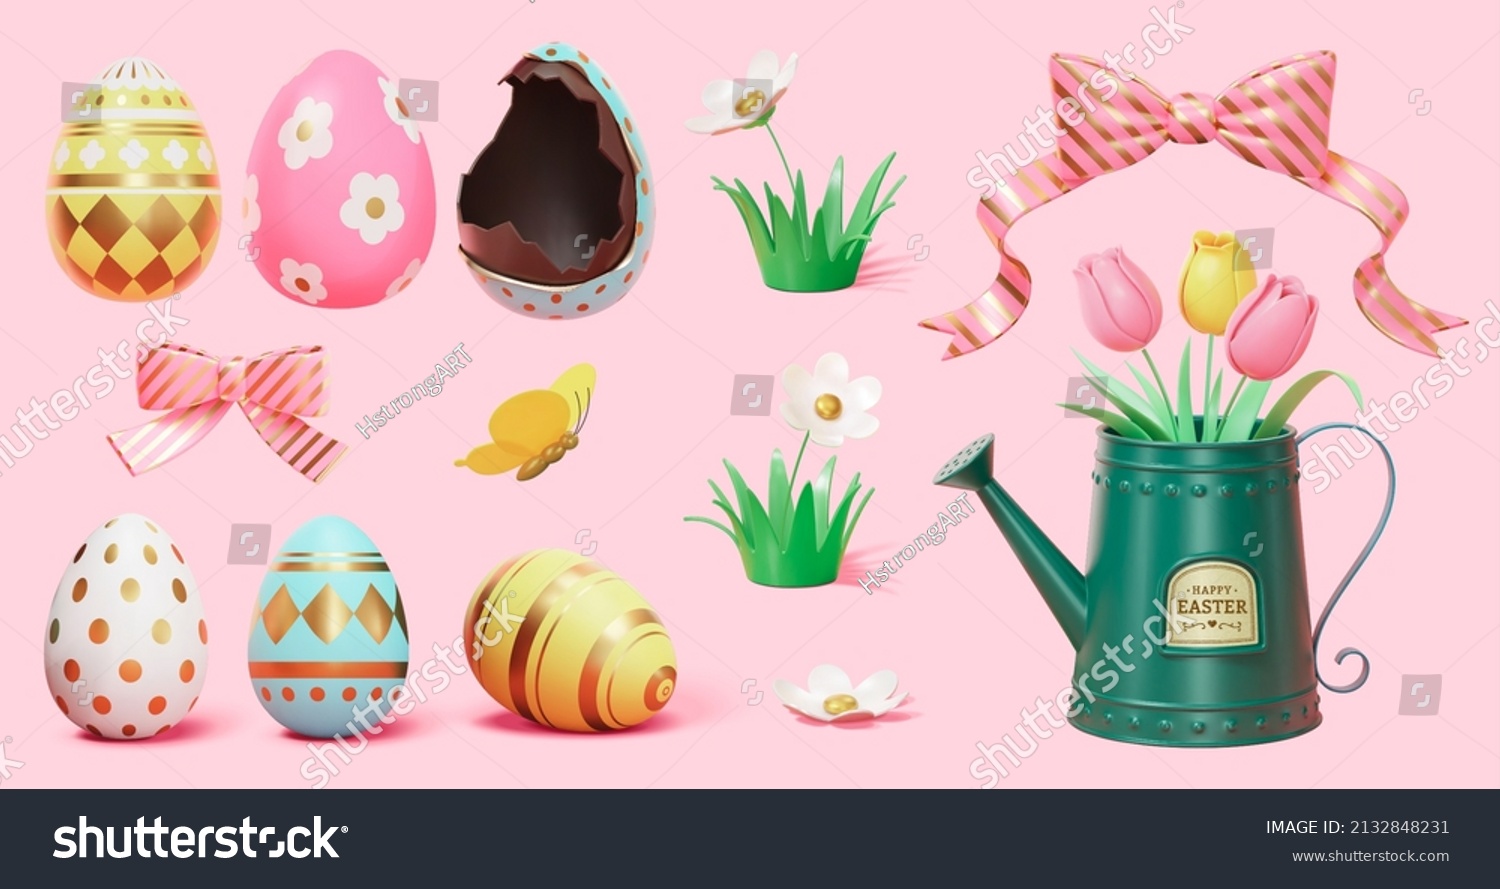 3d spring or Easter holiday decor elements isolated on pink background. Suitable for activity promo or website icons. #2132848231